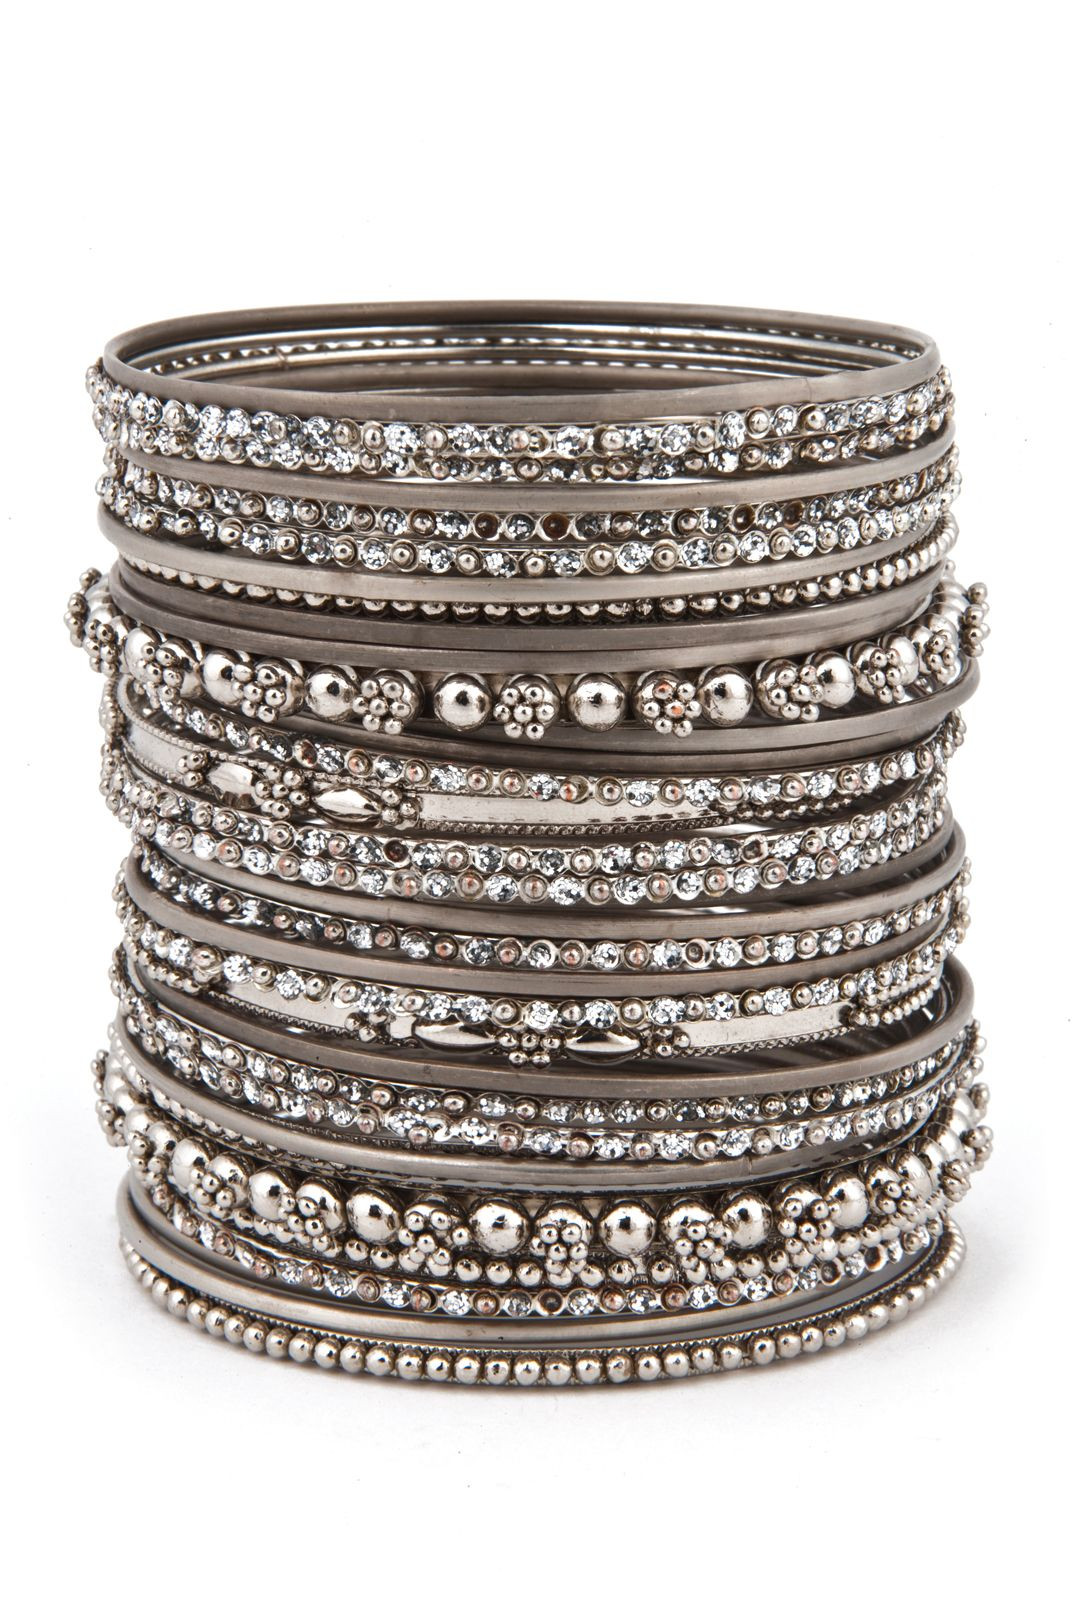 Bangle Bracelets Sets
 The More the Merrier Bangle Set this enormous stack of